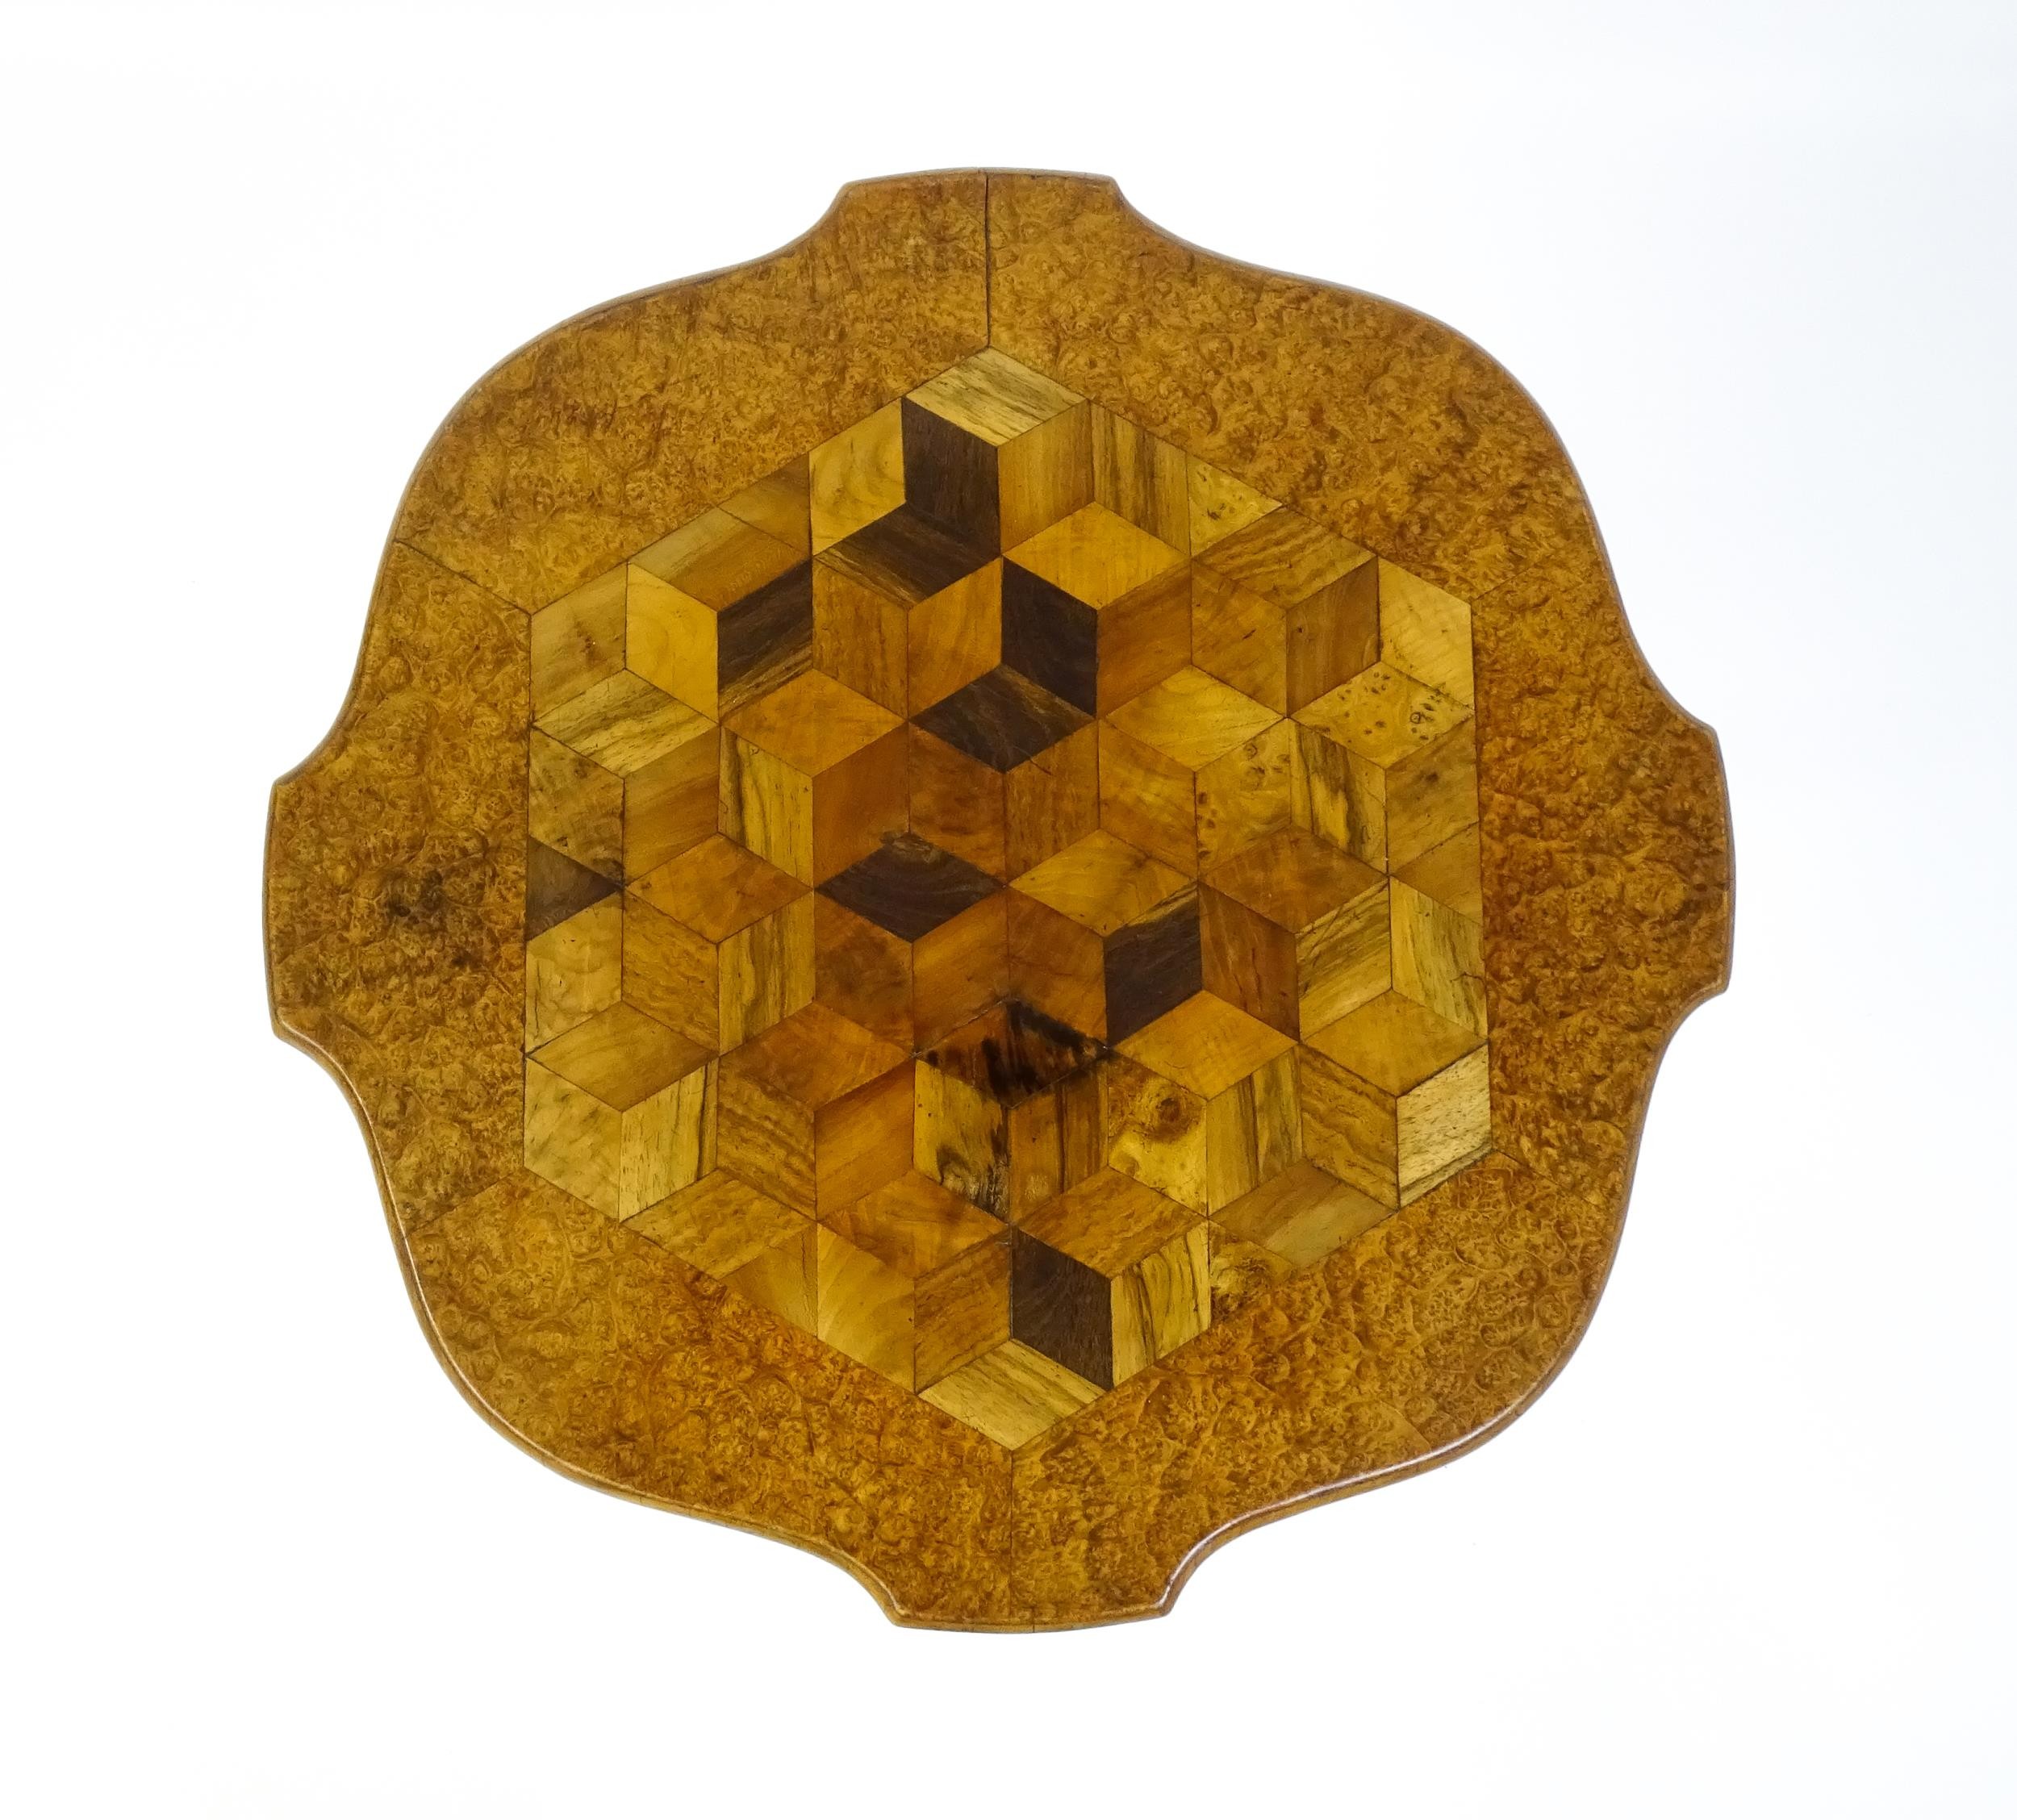 A 19thC tripod table with a burr amboyna veneered top surrounding a central parquetry style sample - Image 3 of 10